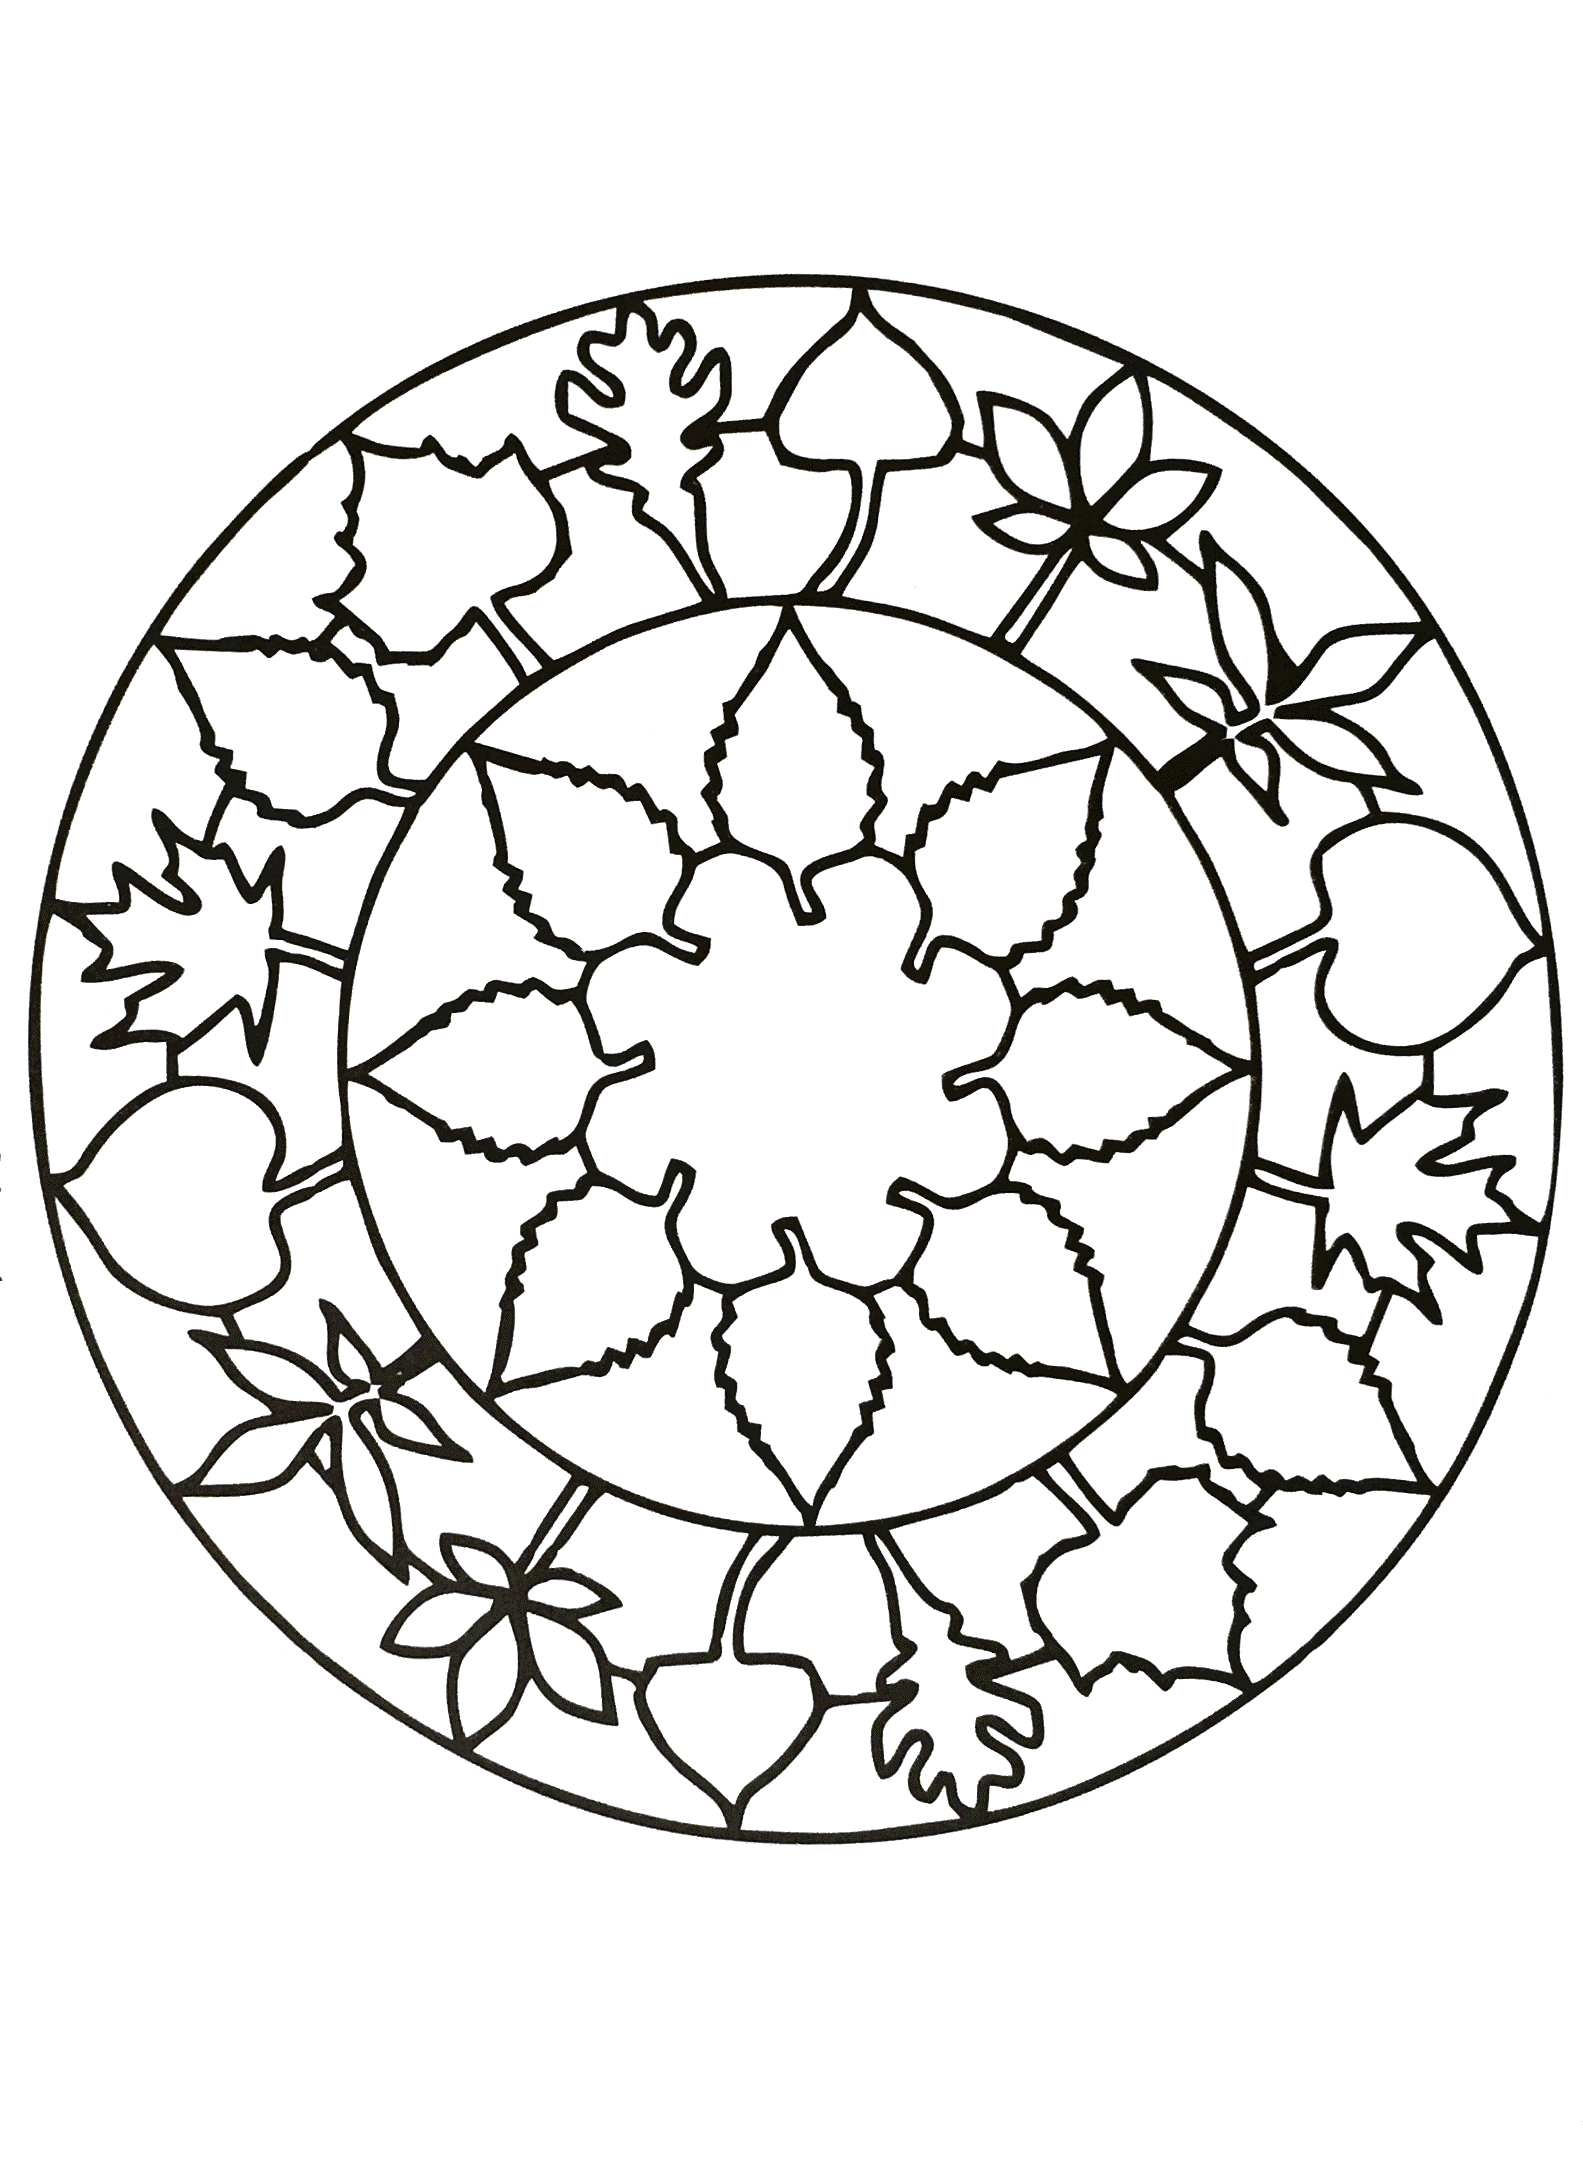 Very simple Mandala drawing to print with big flowers and leaves. When the plant world fits perfectly into a Mandala drawing, that's what it gives. You can print it for free ! So enjoy ! It can sometimes be even more relaxing when coloring and passively listening to music : don't hesitate to do it !